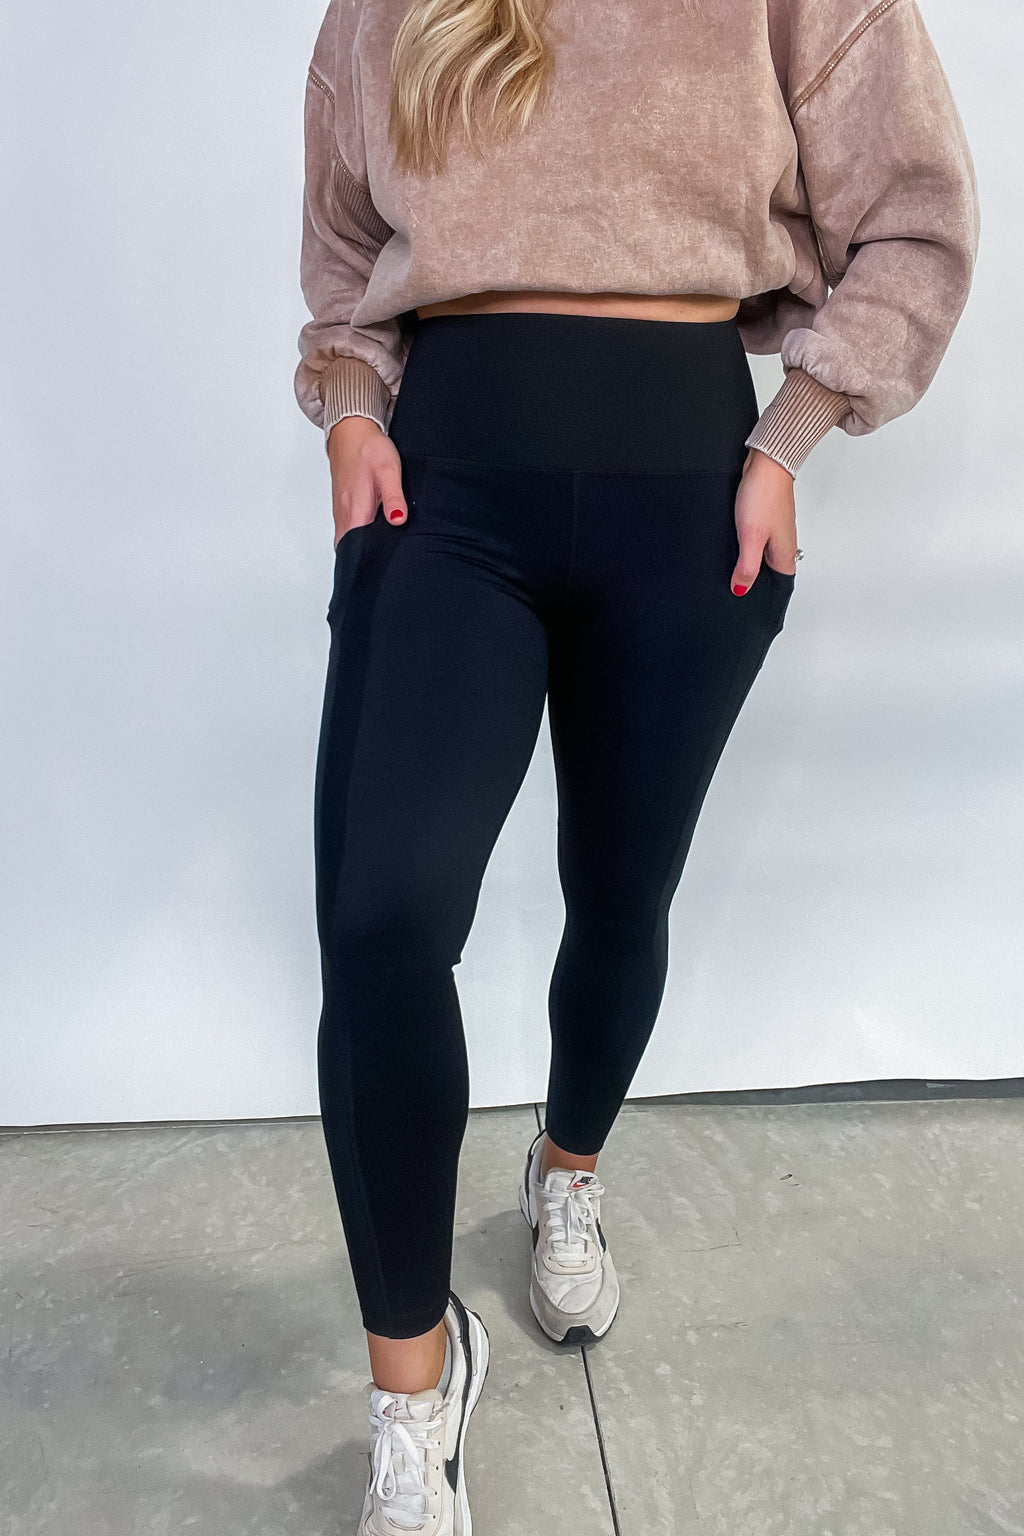 High Waisted Solid Knit Leggings - Black